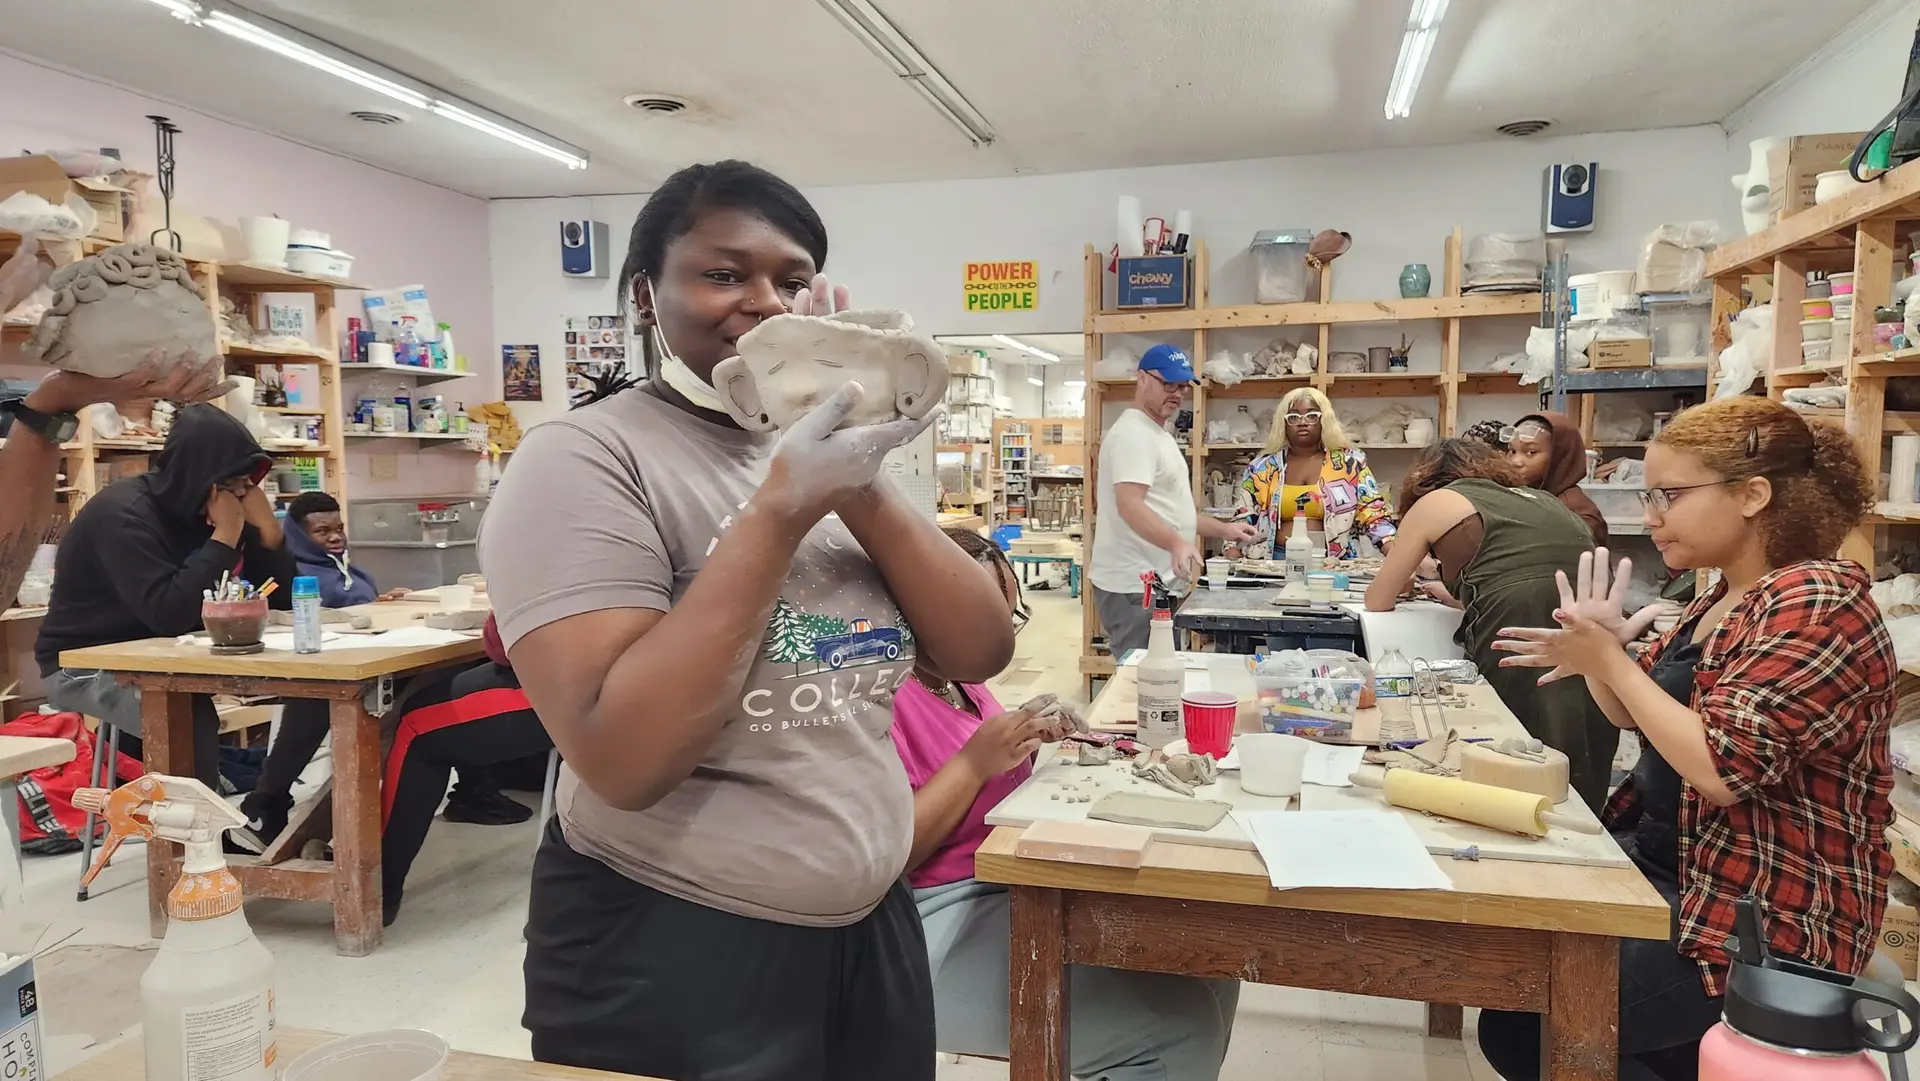 A young artist stand in a ceramics studio holding a work in progress. Other students are working at a long table behind her.